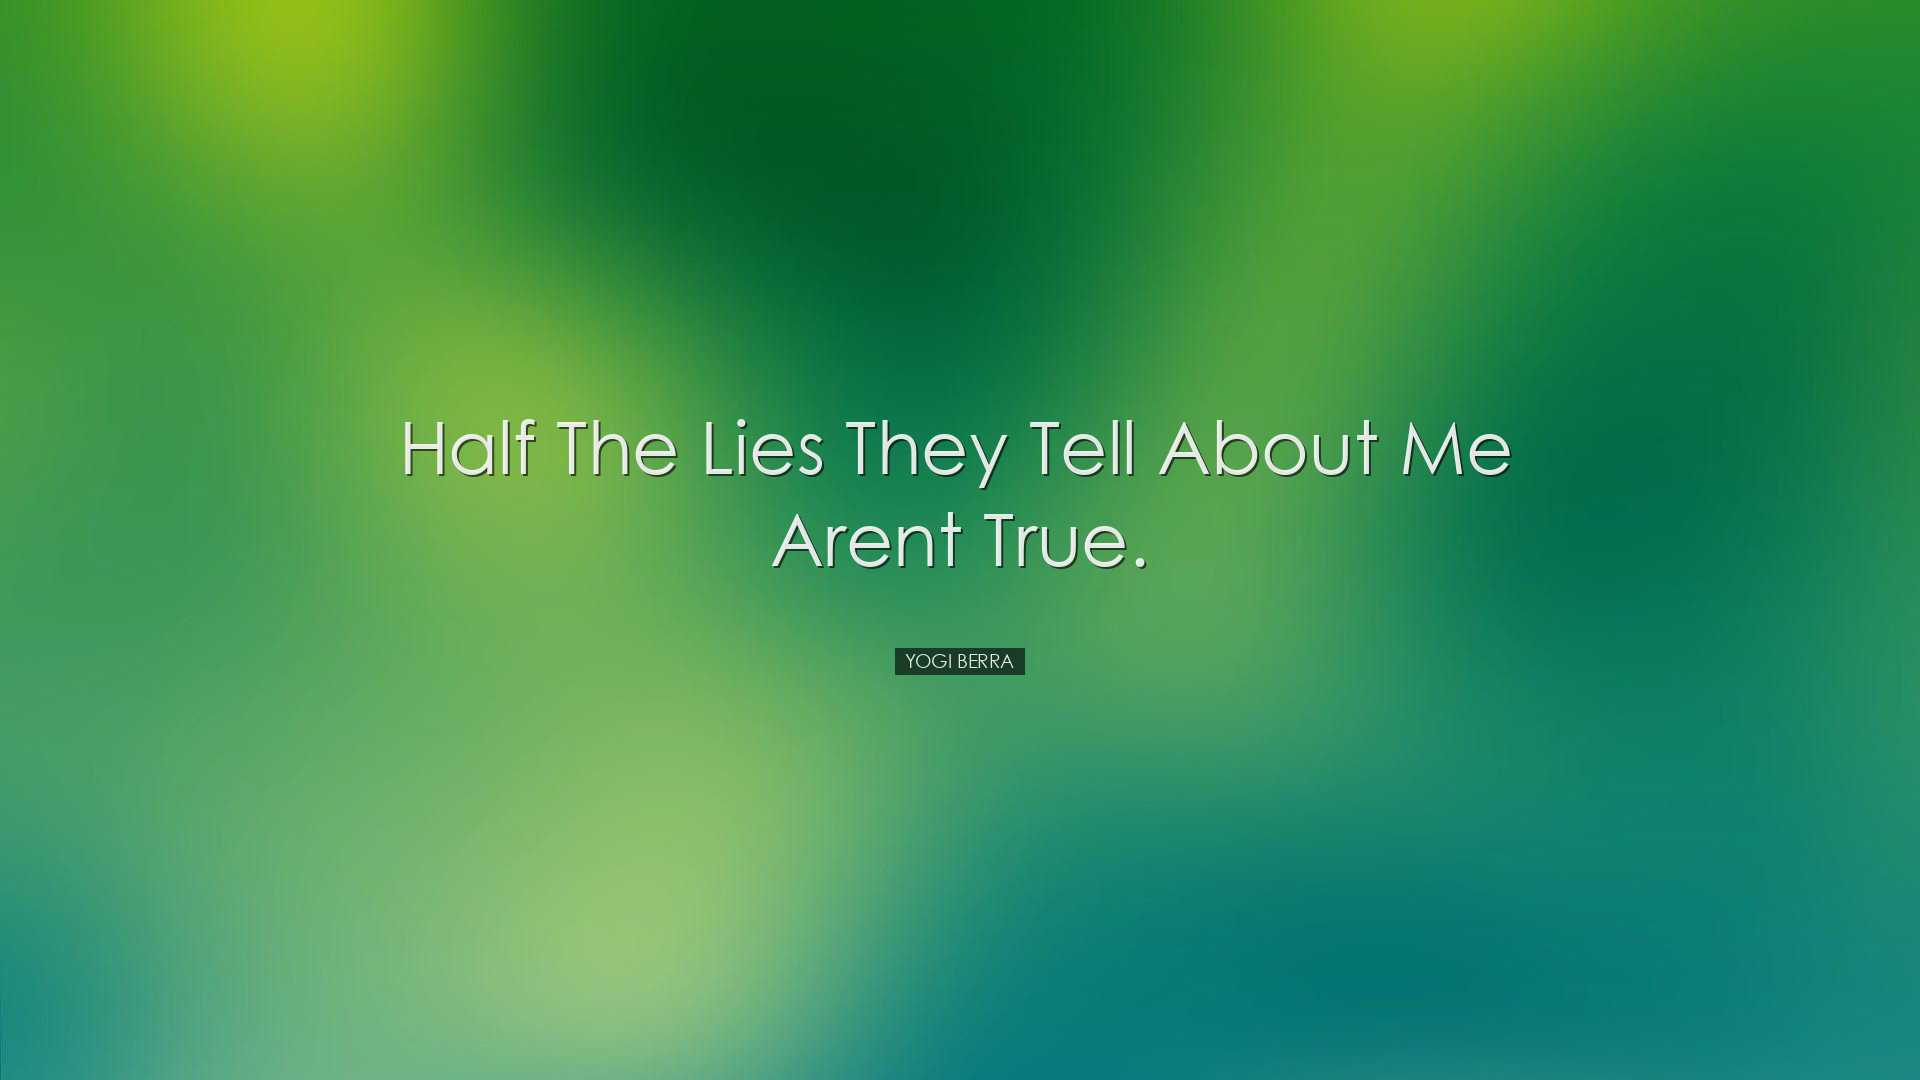 Half the lies they tell about me arent true. - Yogi Berra